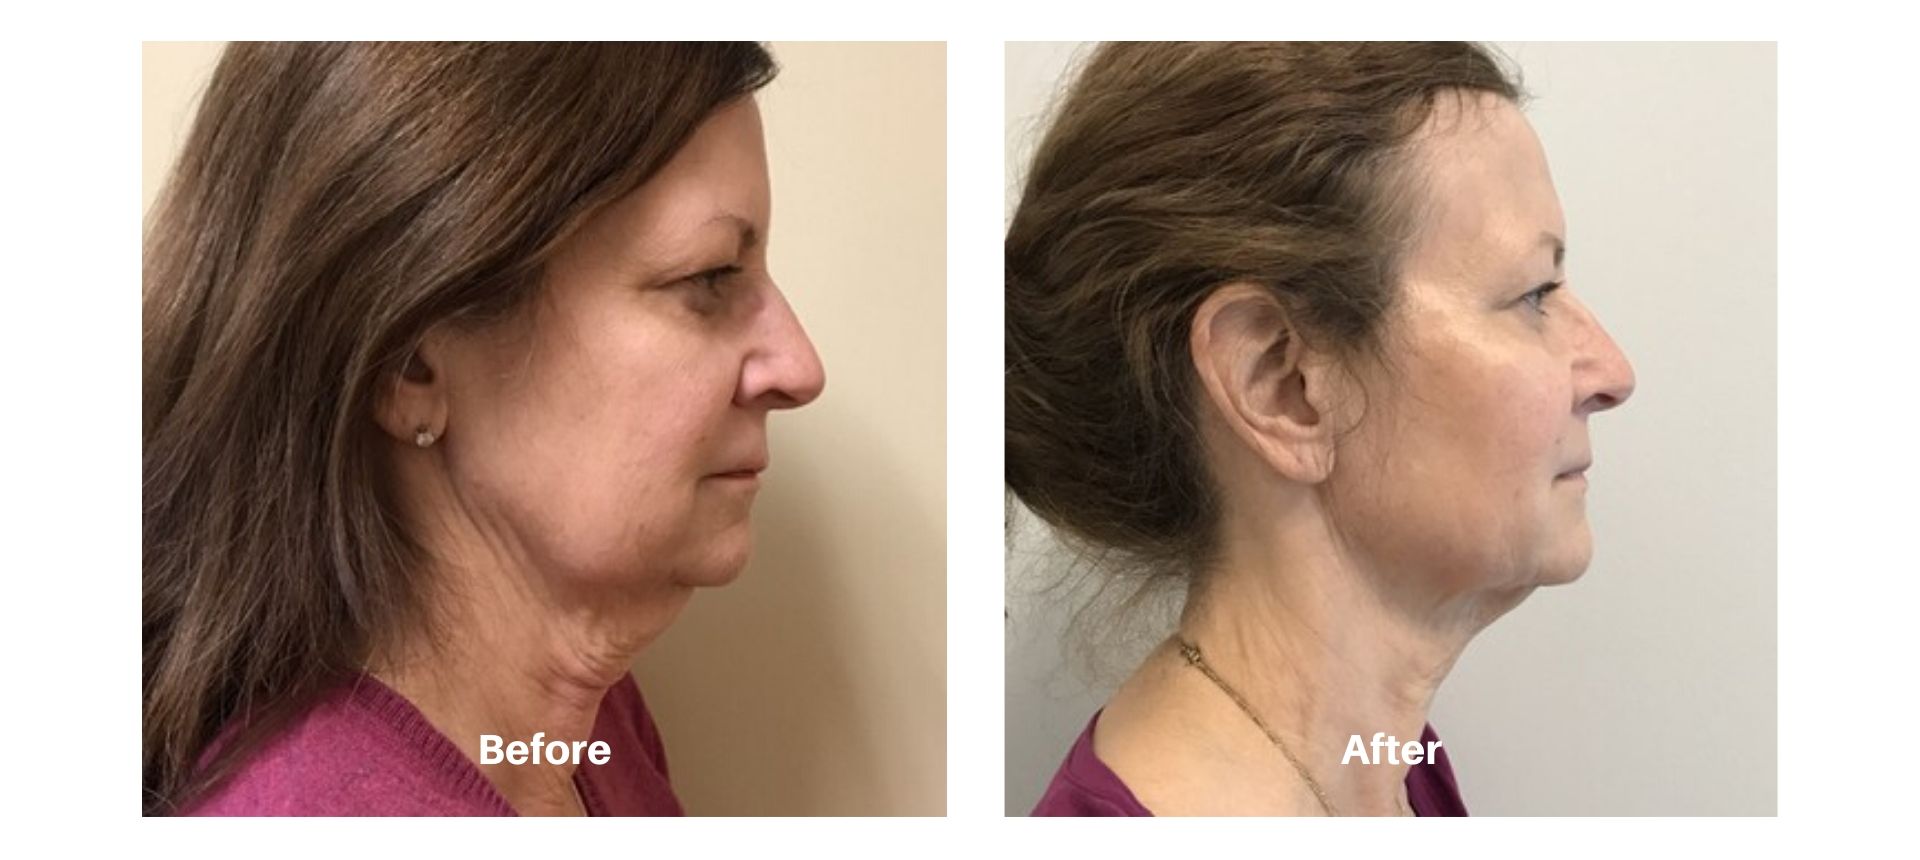 Woman's before and after pics from Kybella treatment at Always Beautiful.